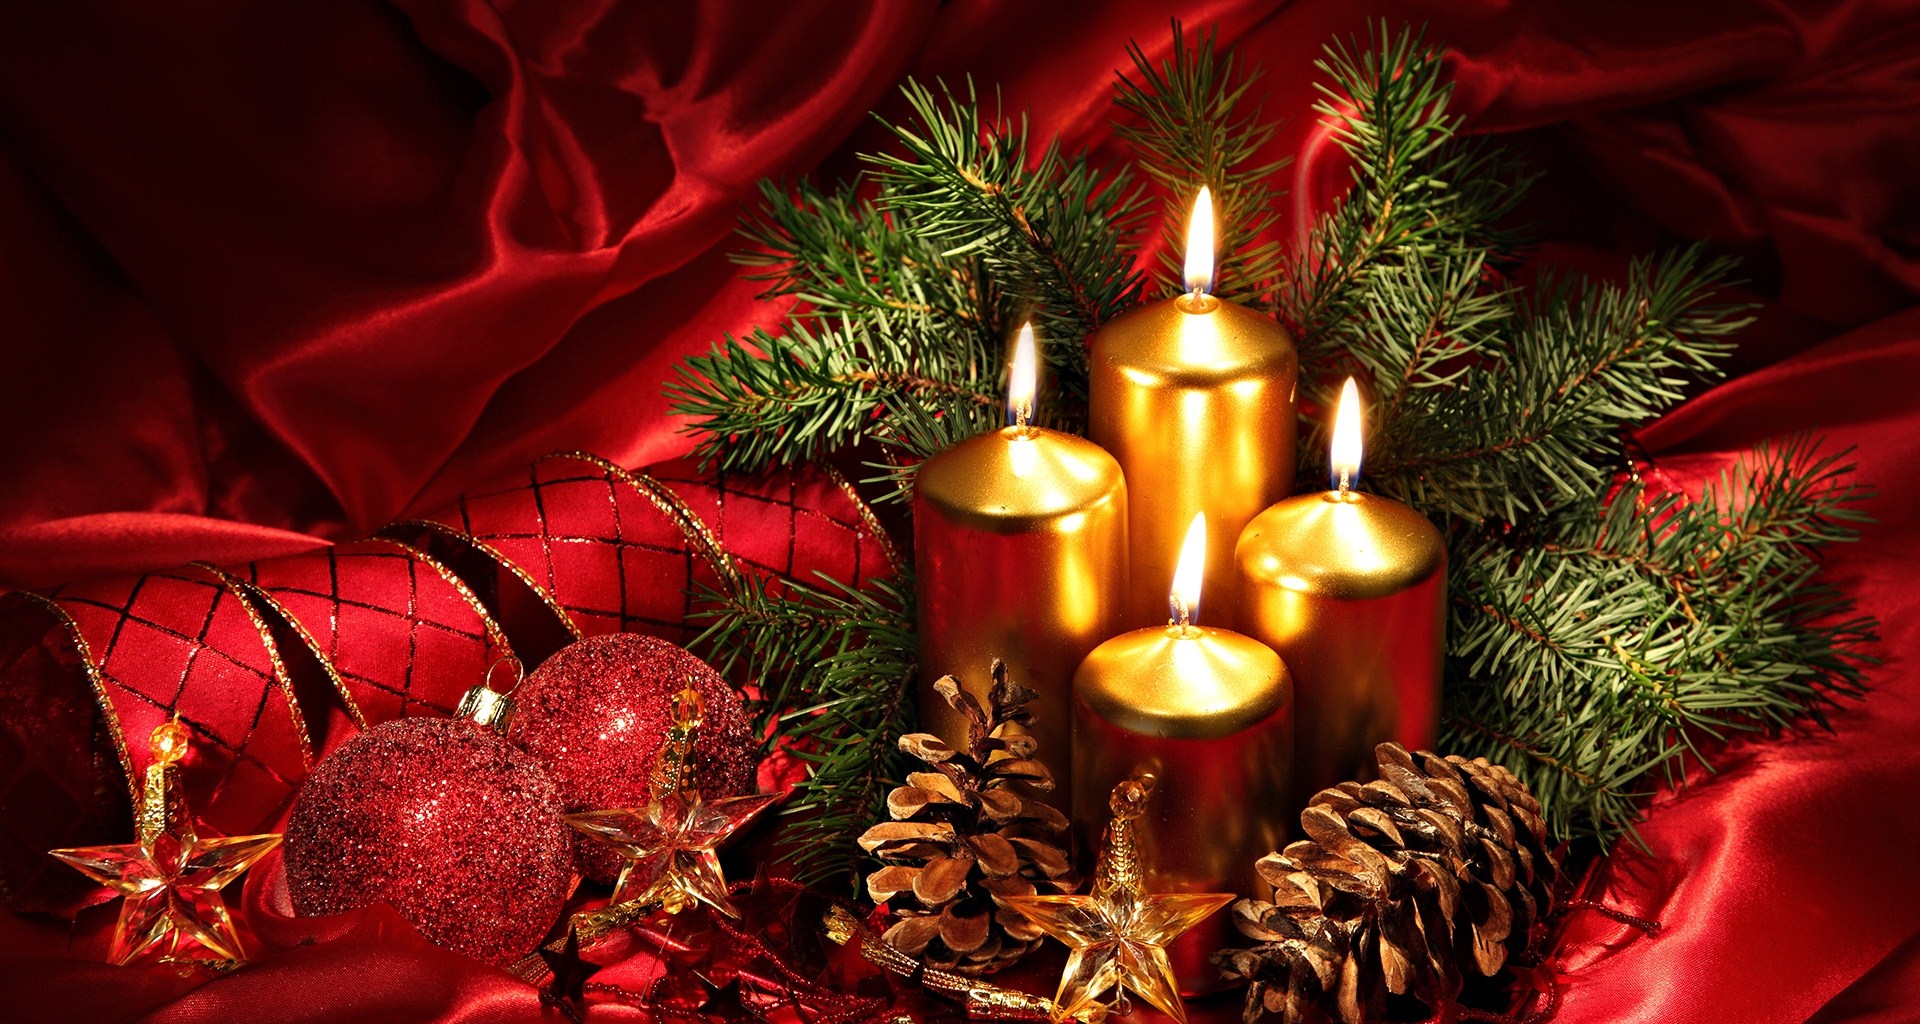 Christmas Candle wallpapers 2015 2015 Happy Xmas Candle download